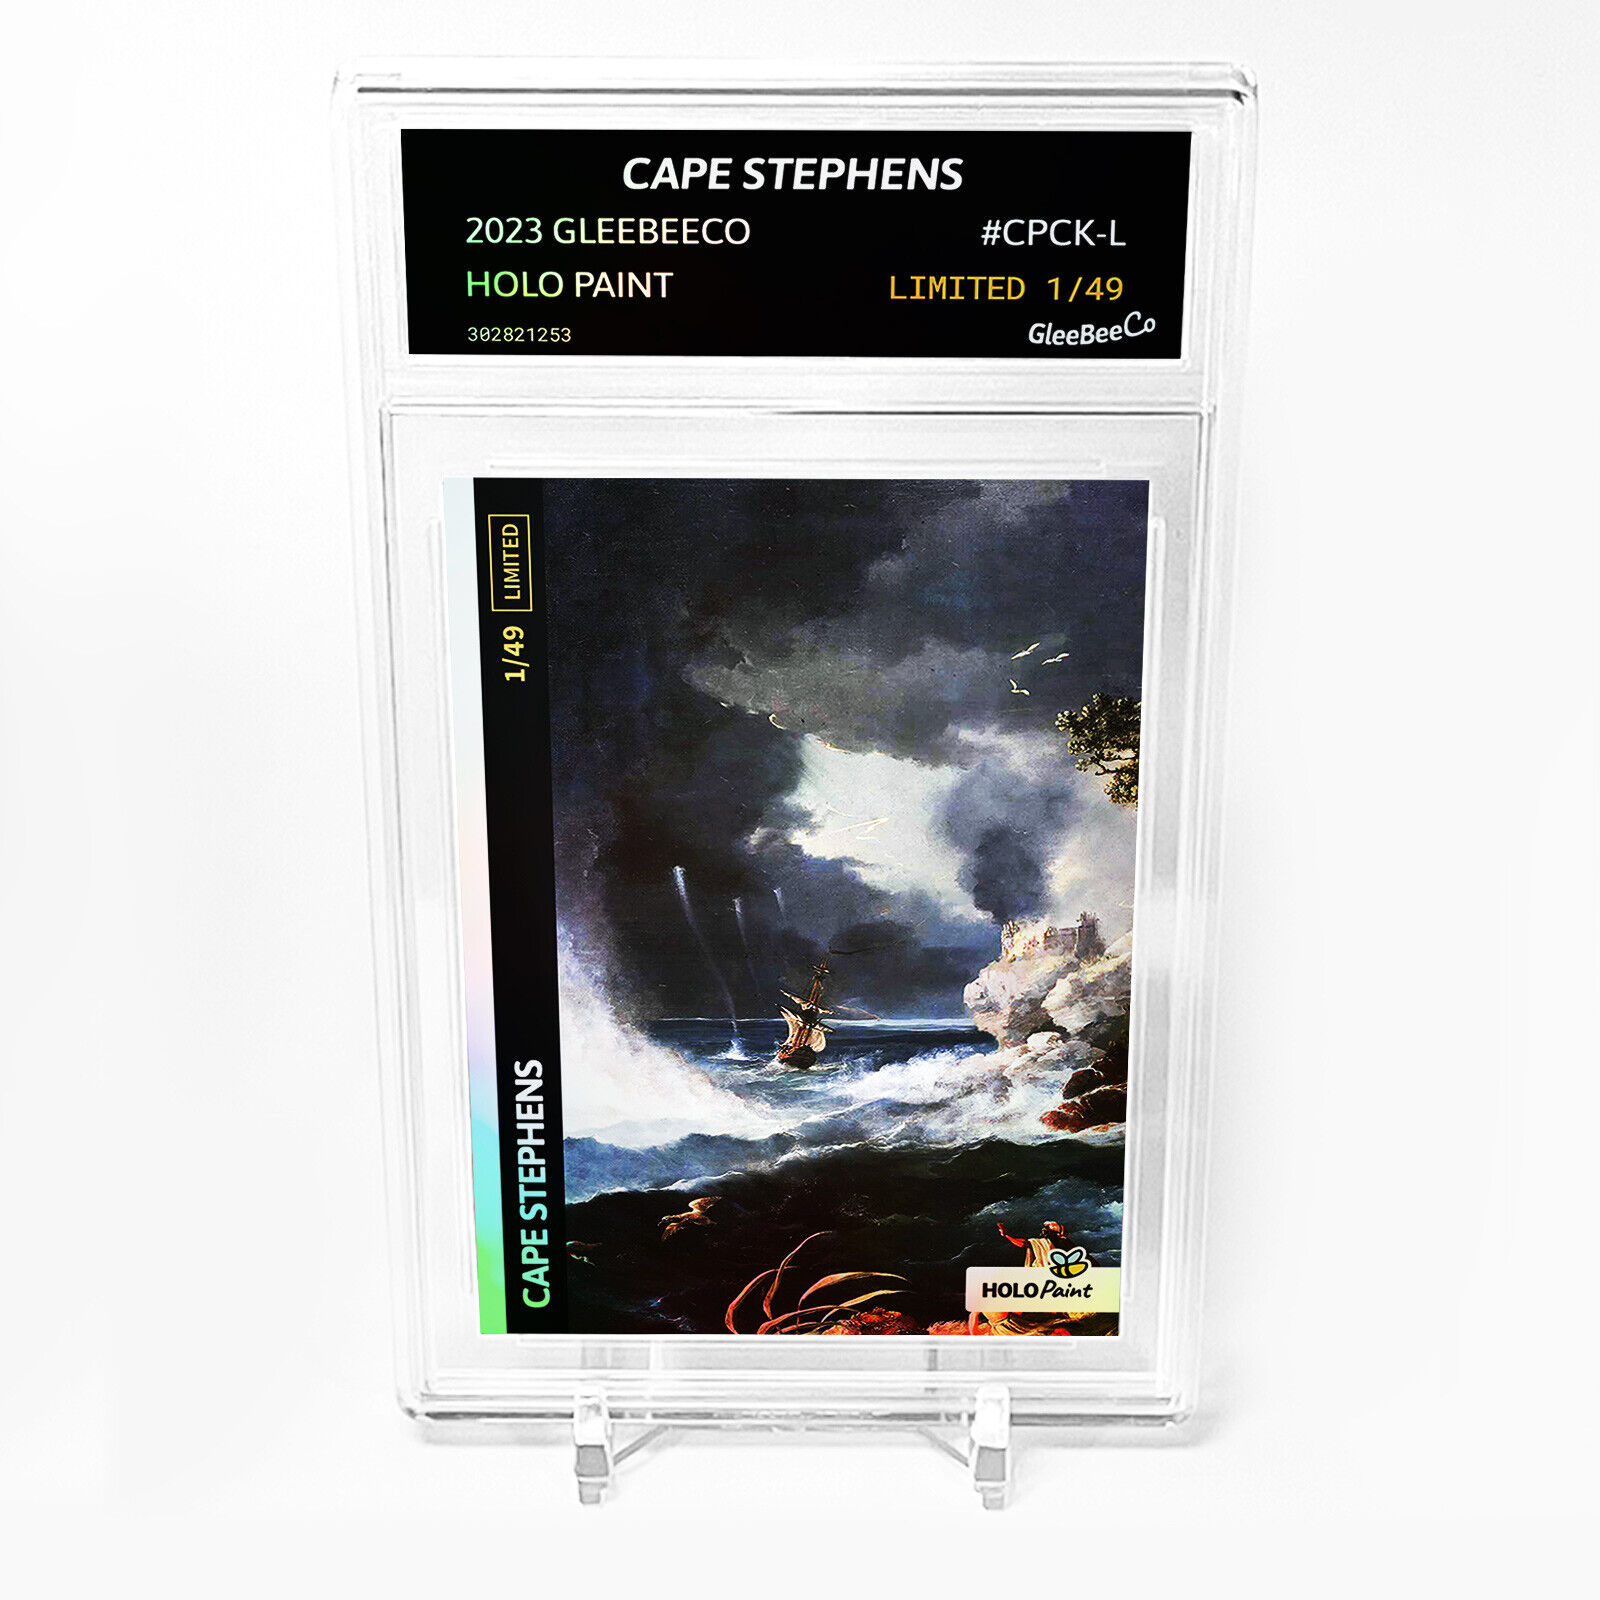 CAPE STEPHENS Card 2023 GleeBeeCo Holo Paint Slabbed #CPCK-L Only /49